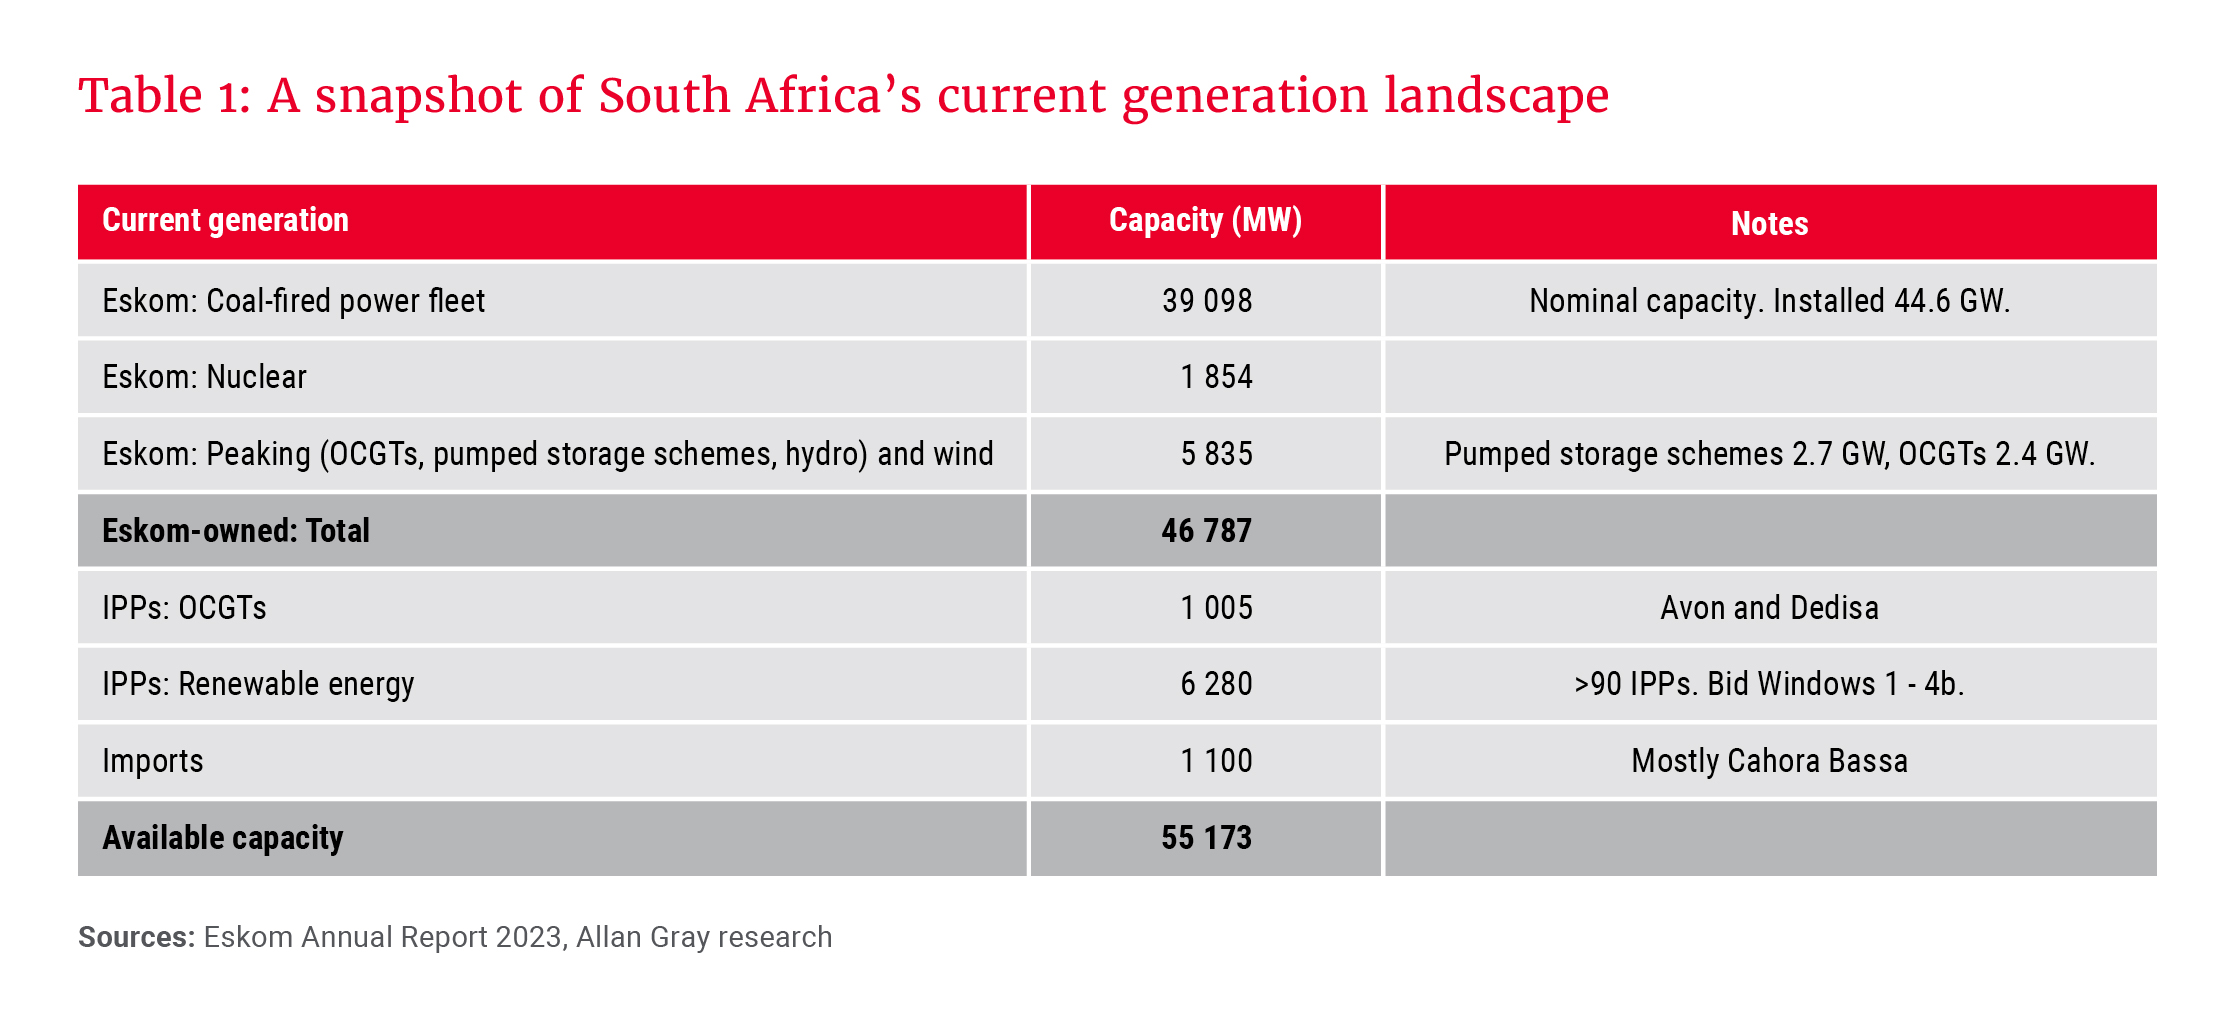 Table 1_A snapshot of South Africa's current generation landscape_300dpi.jpg